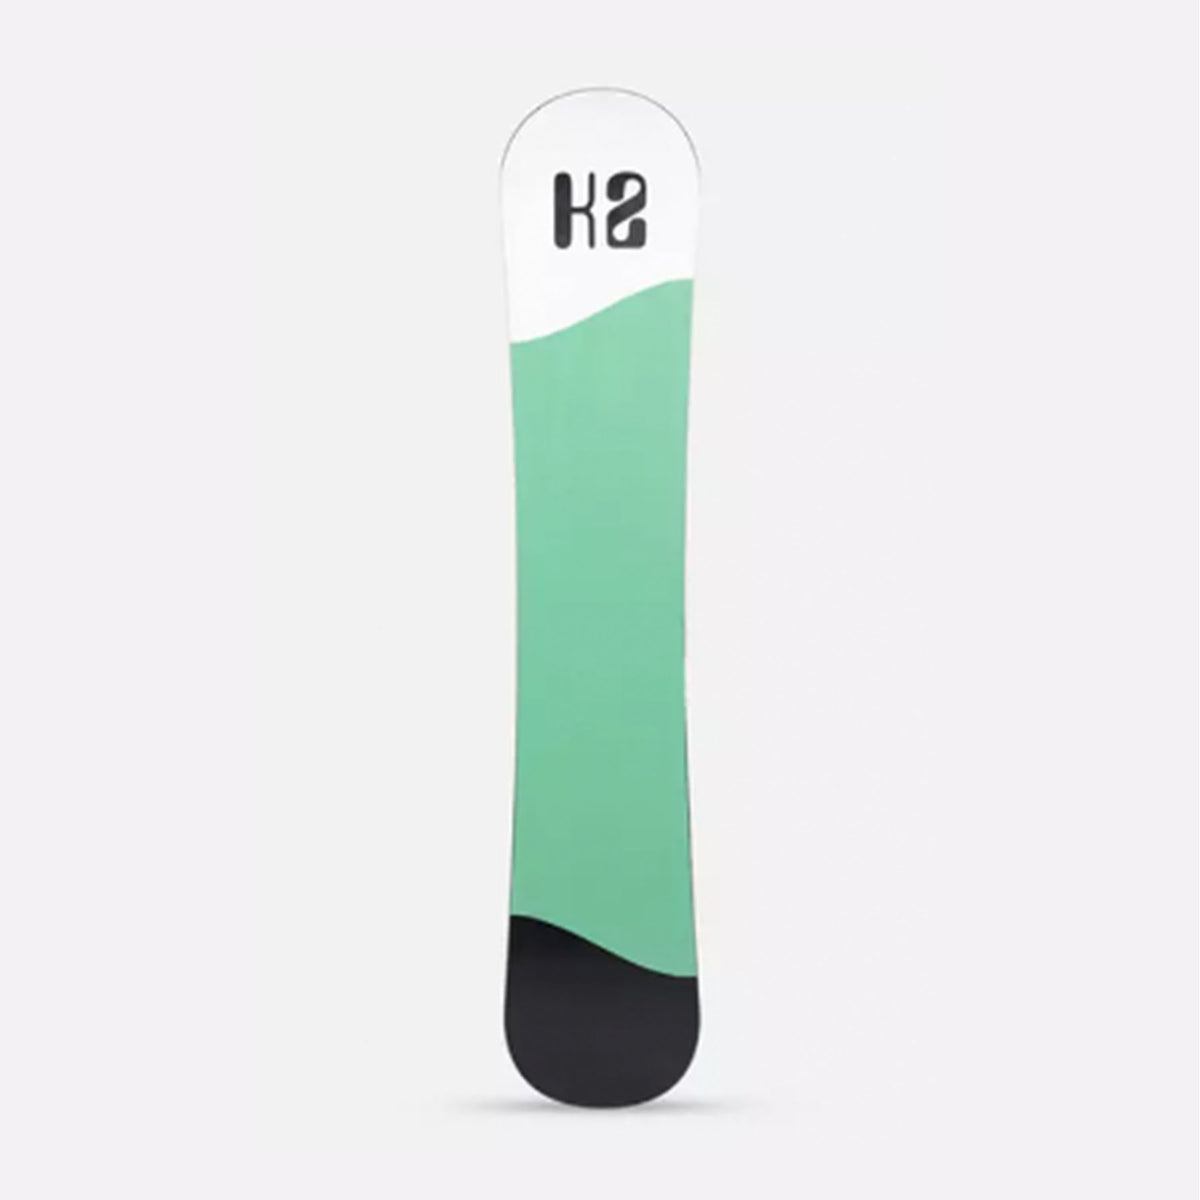 Image features the bottom of the Women's K2 First Lite Snowboard with a white nose, sea foam green mid section, and a black tale. There's also a black K2 logo printed on the nose.